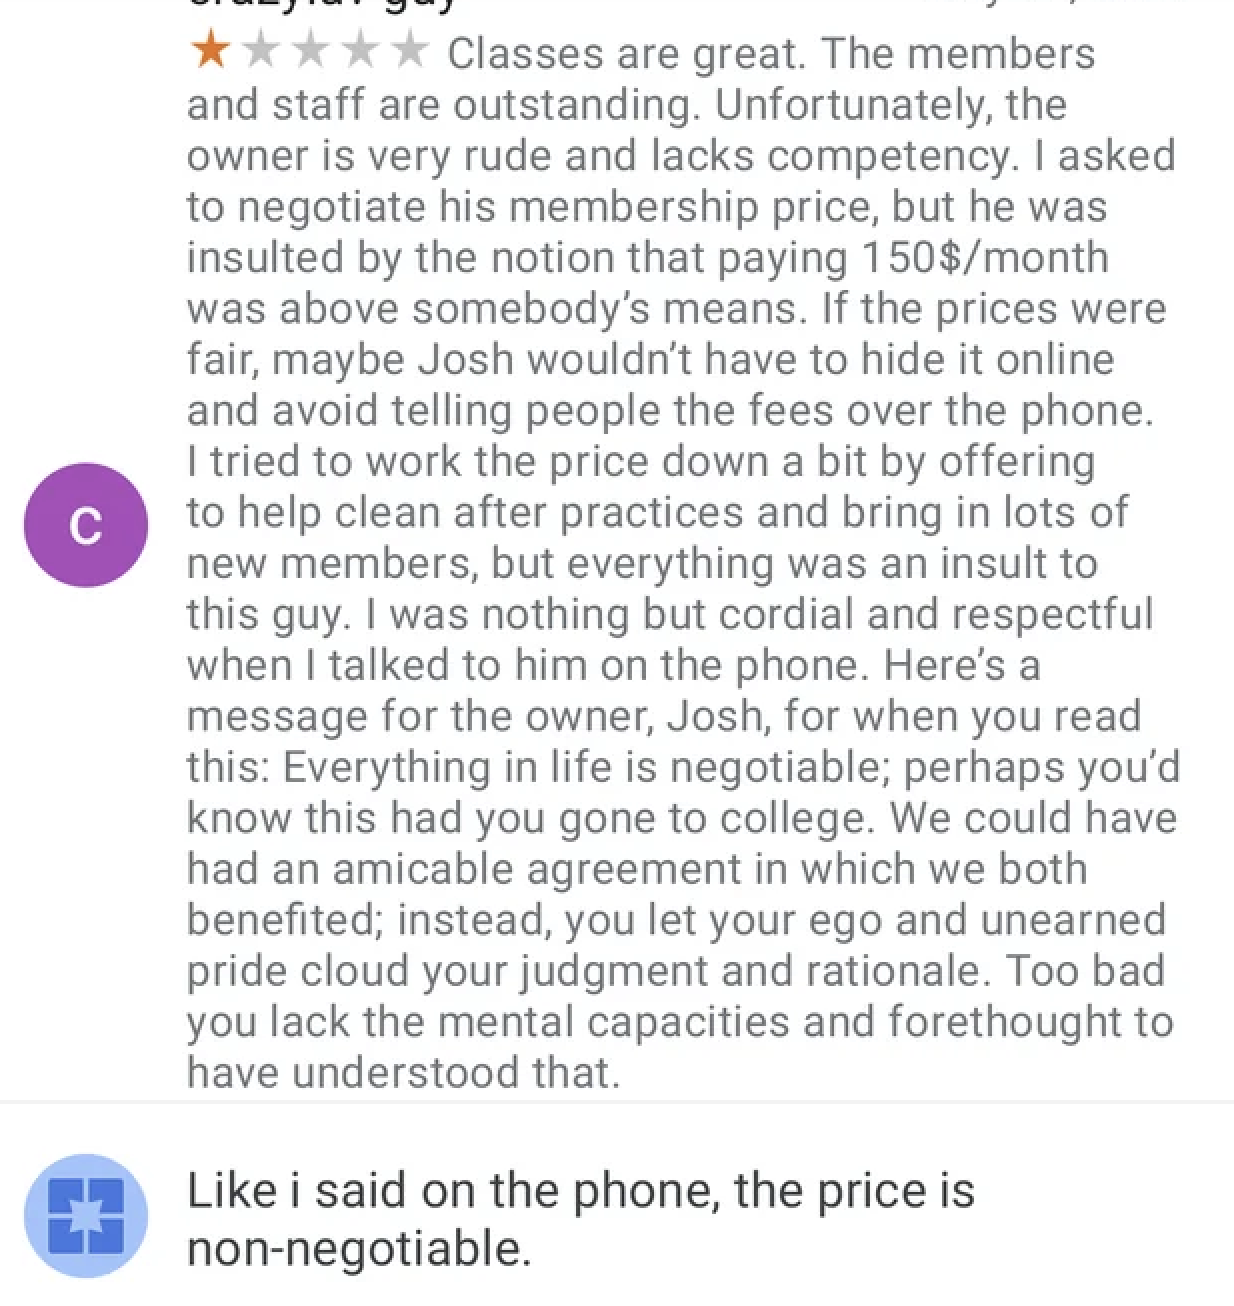 &quot;Like i said on the phone, the price is non-negotiable&quot;